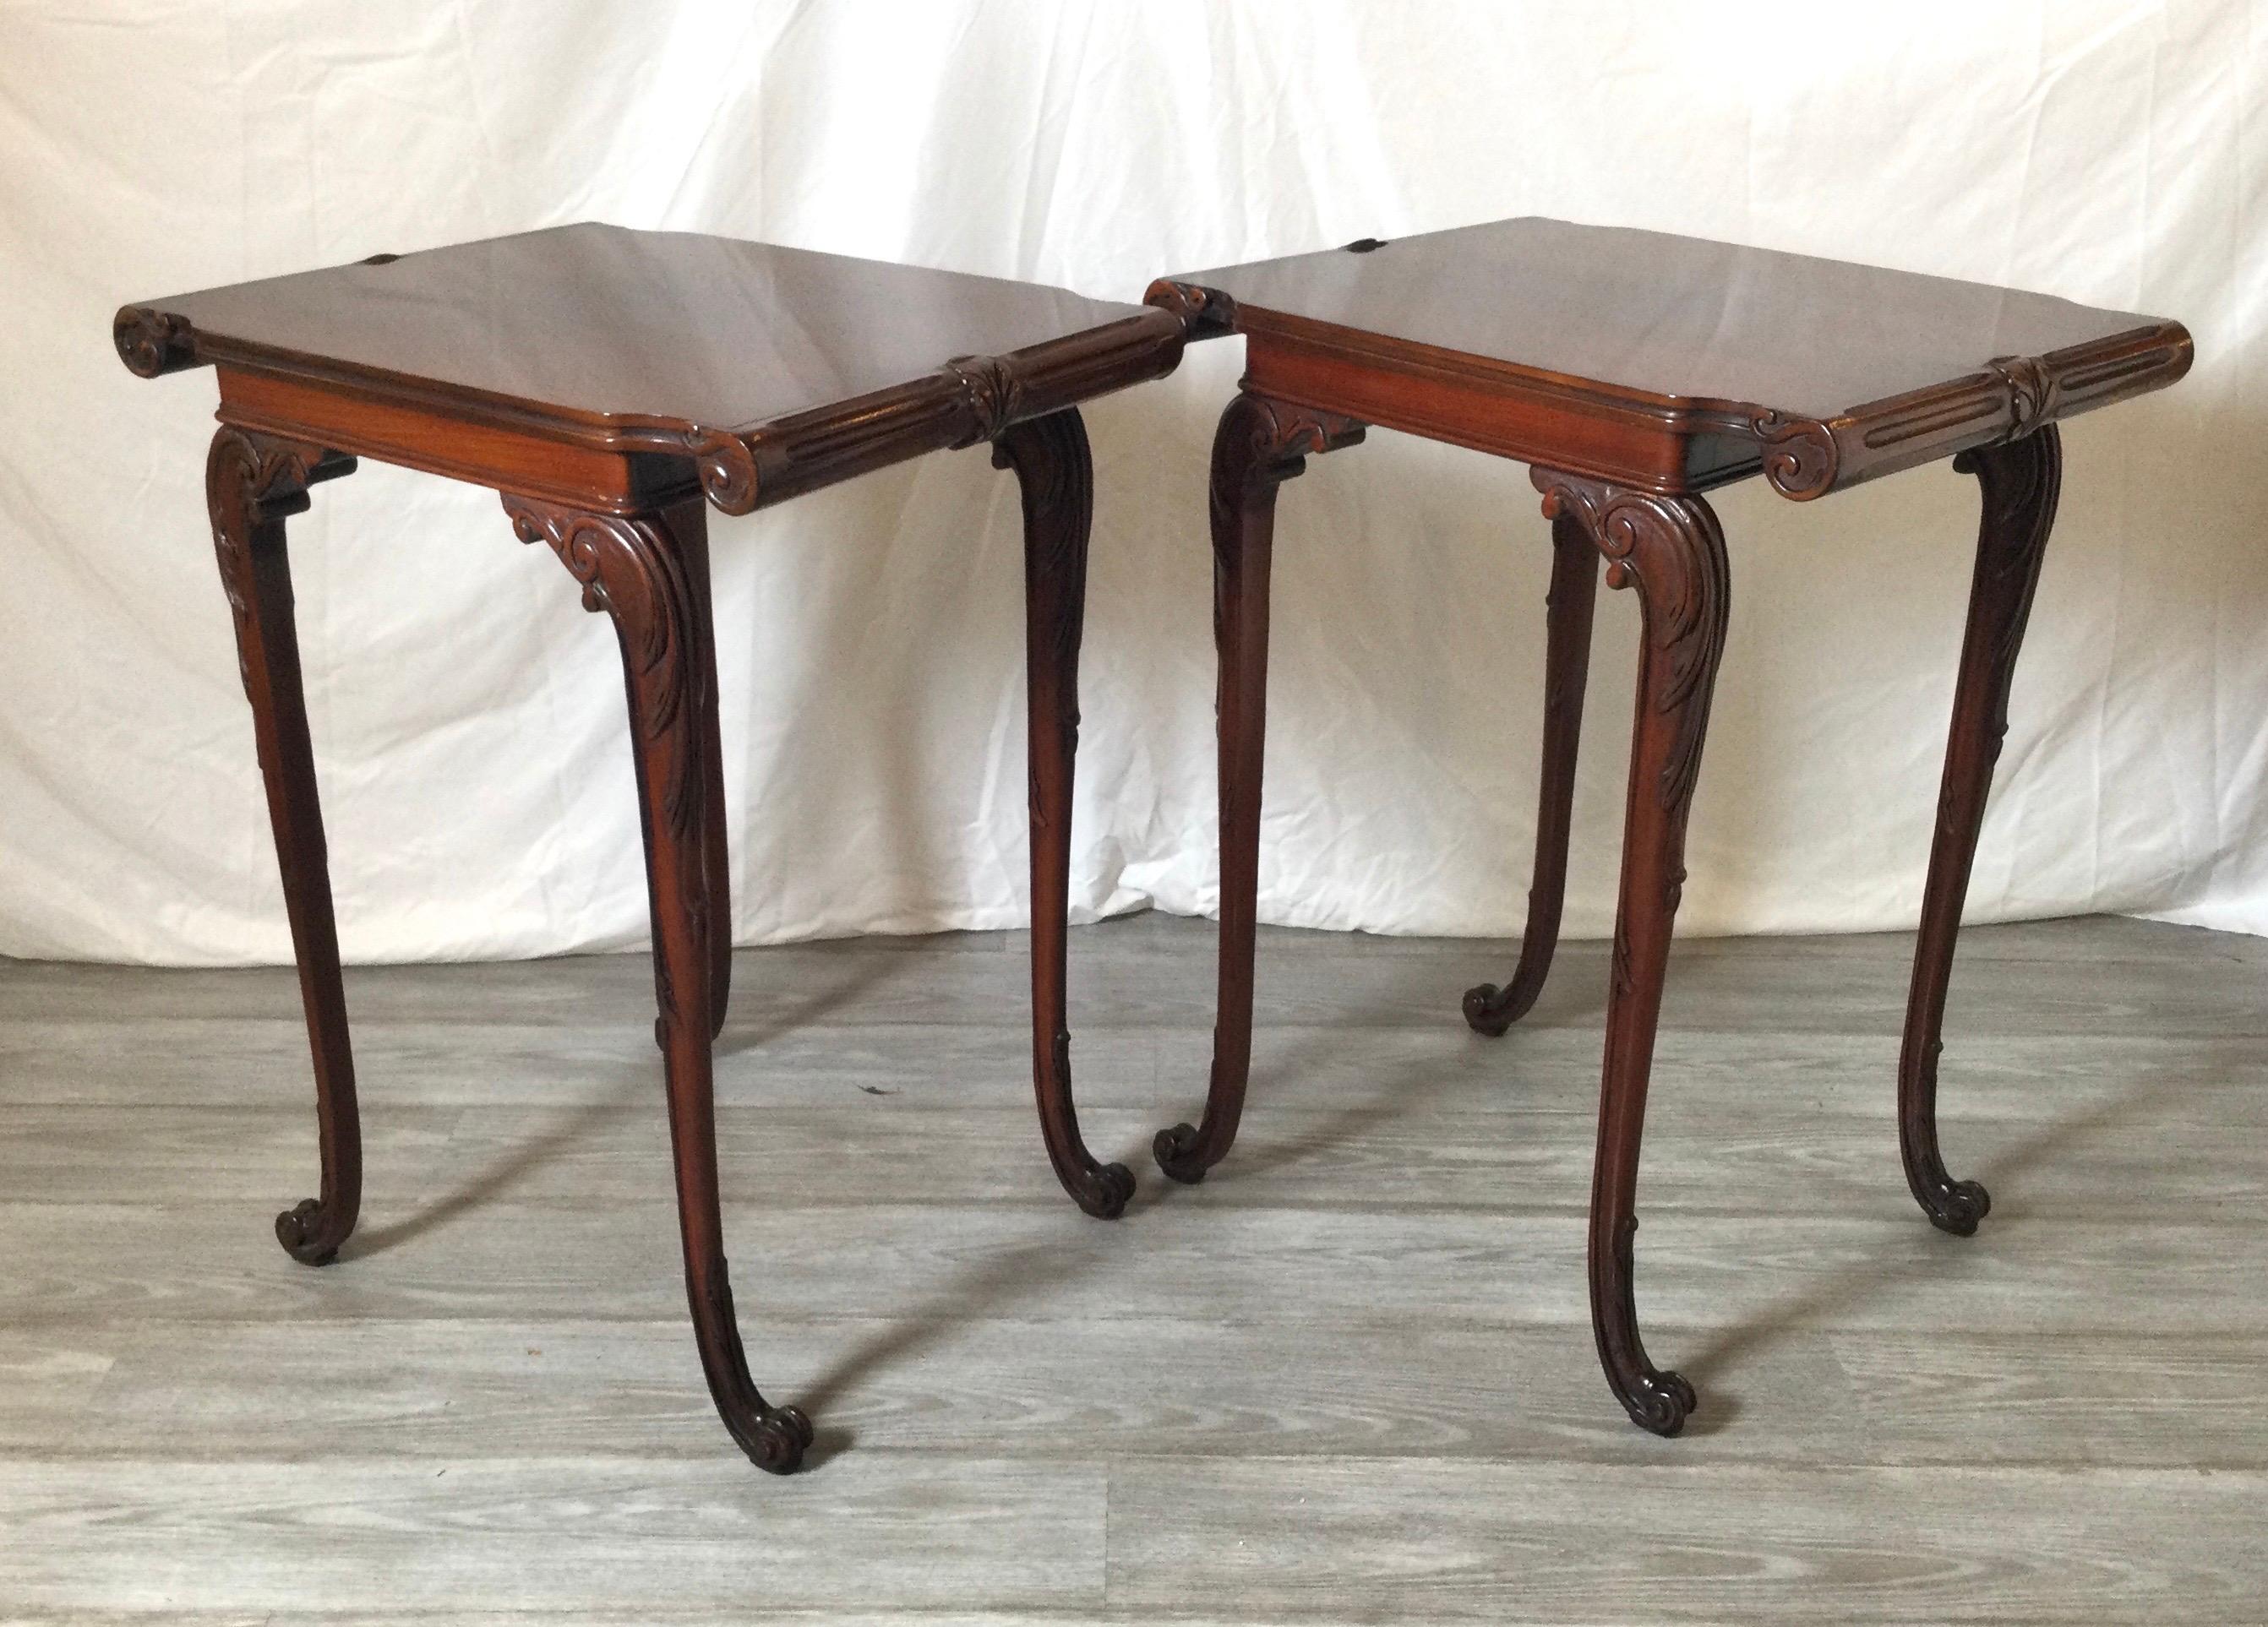 Elegant pair of antique mahogany side tables. Removable glass cut to form tops. Very stylish carved ends and delicate legs. Measures: 22